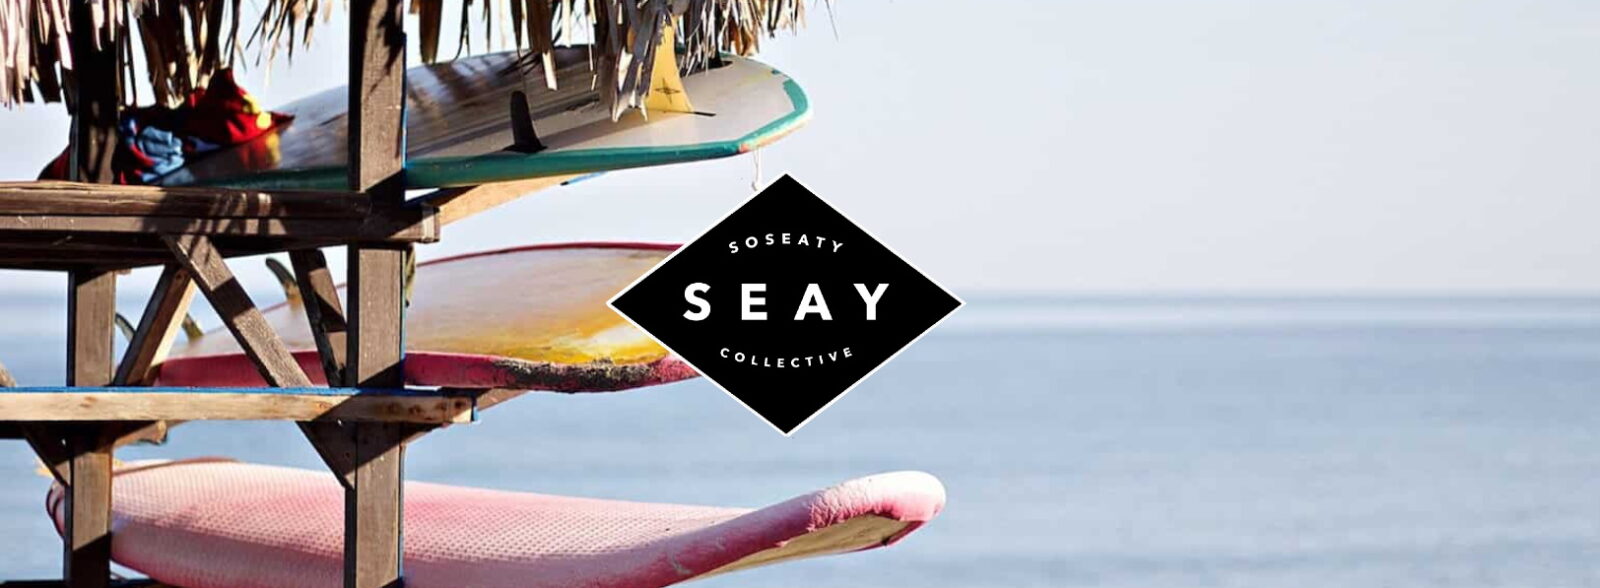 SEAY – SOSEATY COLLECTIVE